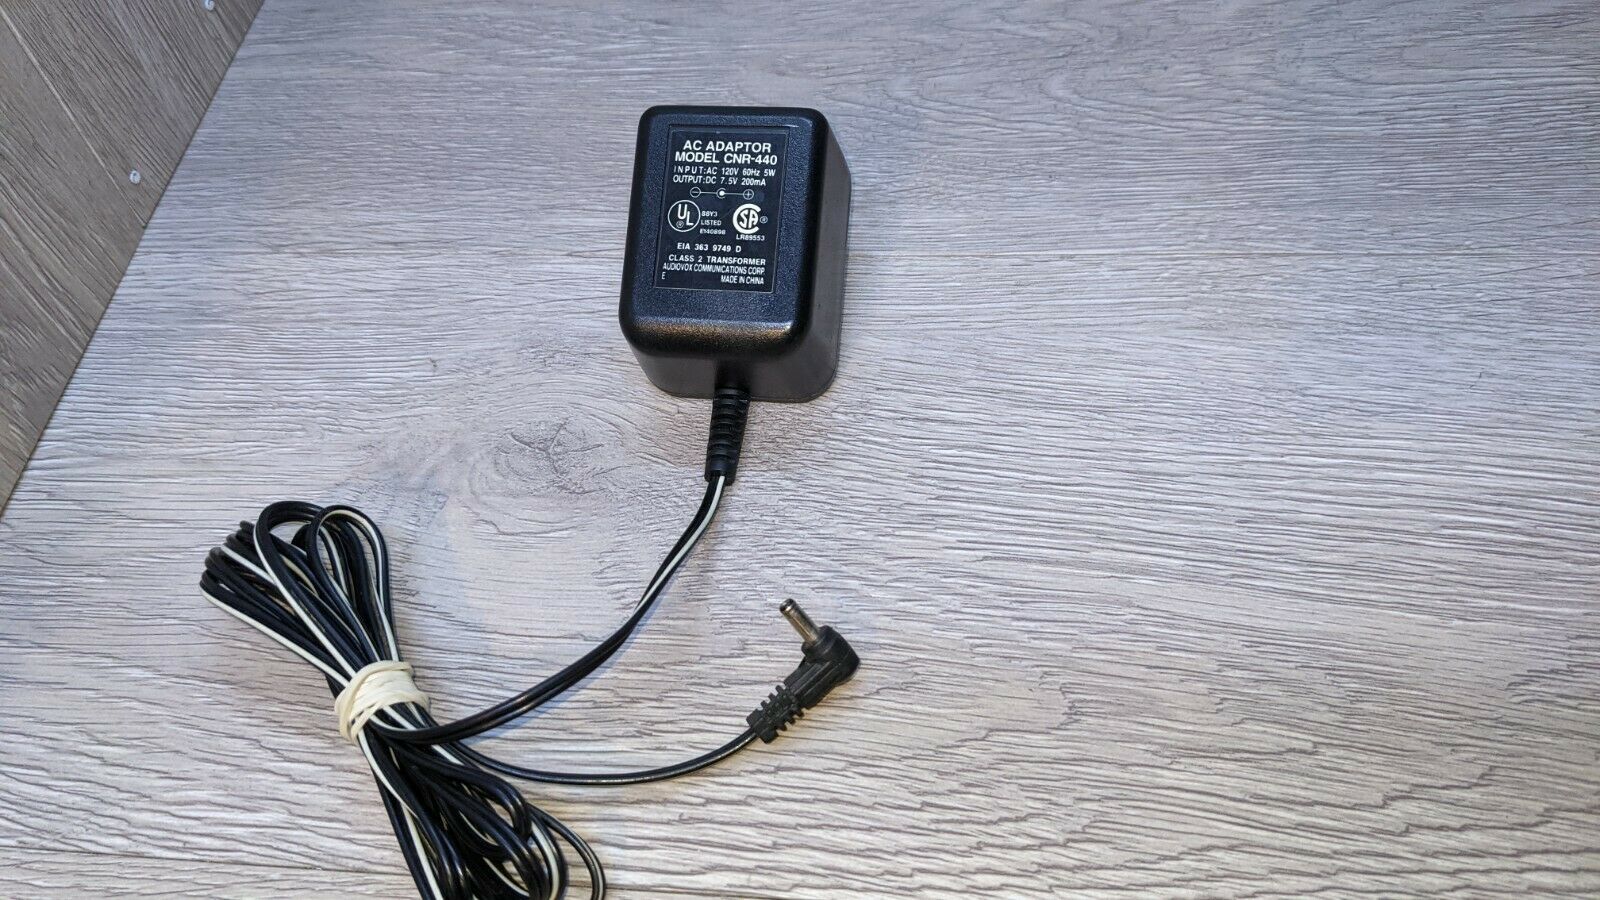 *Brand NEW*CNR-440 DC 7.5V 200MA Class 2 Wall Very Good Audiovox AC Adapter Power Supply